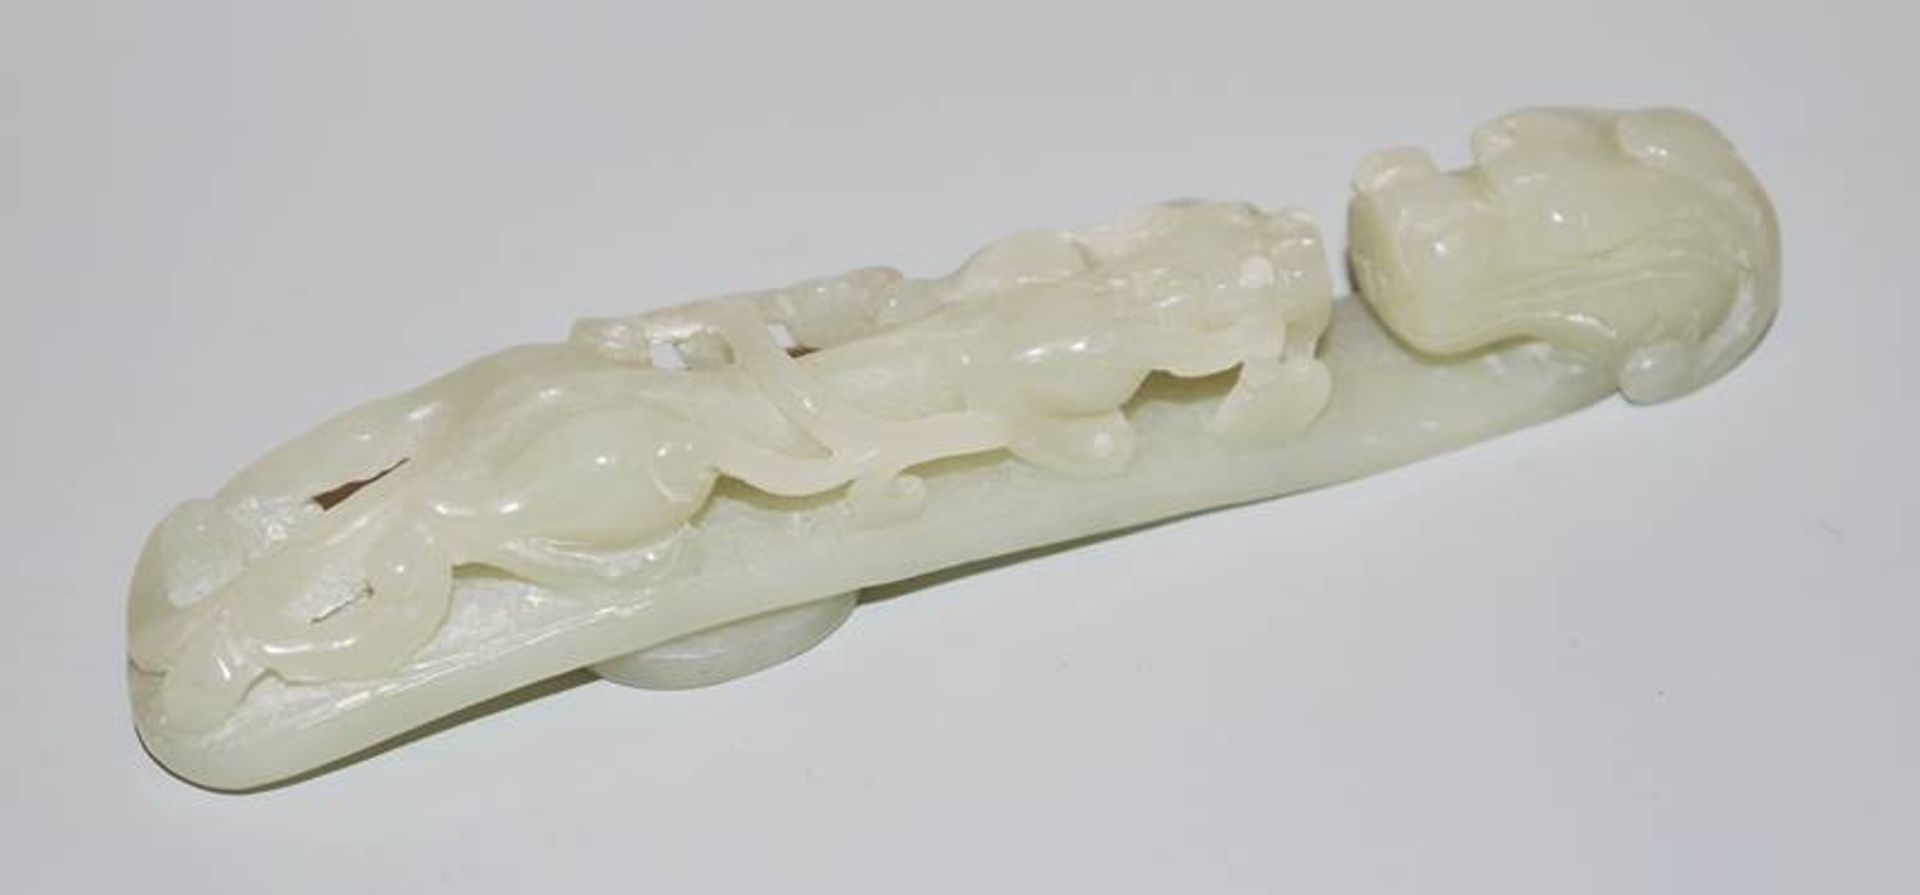 Jade belt hook, China, probably Qing period 18th/19th century